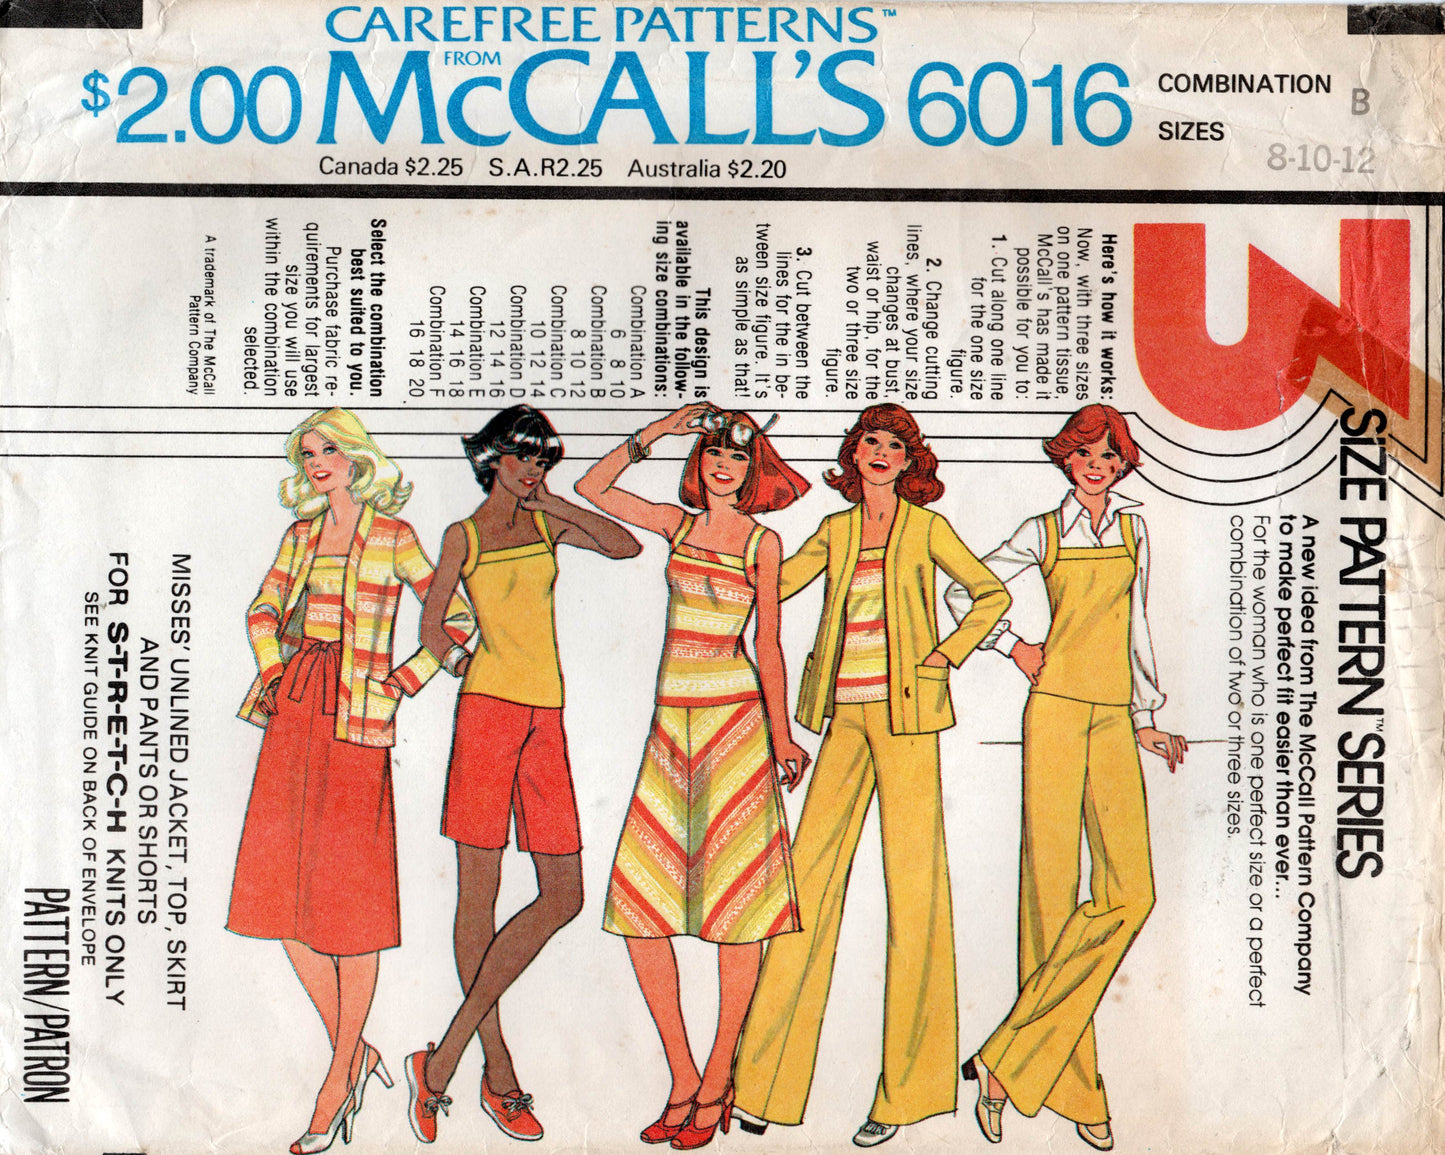 McCall's 6016 Womens Stretch Knit Jacket Top Skirt Shorts & Pants 1970s Vintage Sewing Pattern Sizes 8 - 12 UNCUT Factory Folded